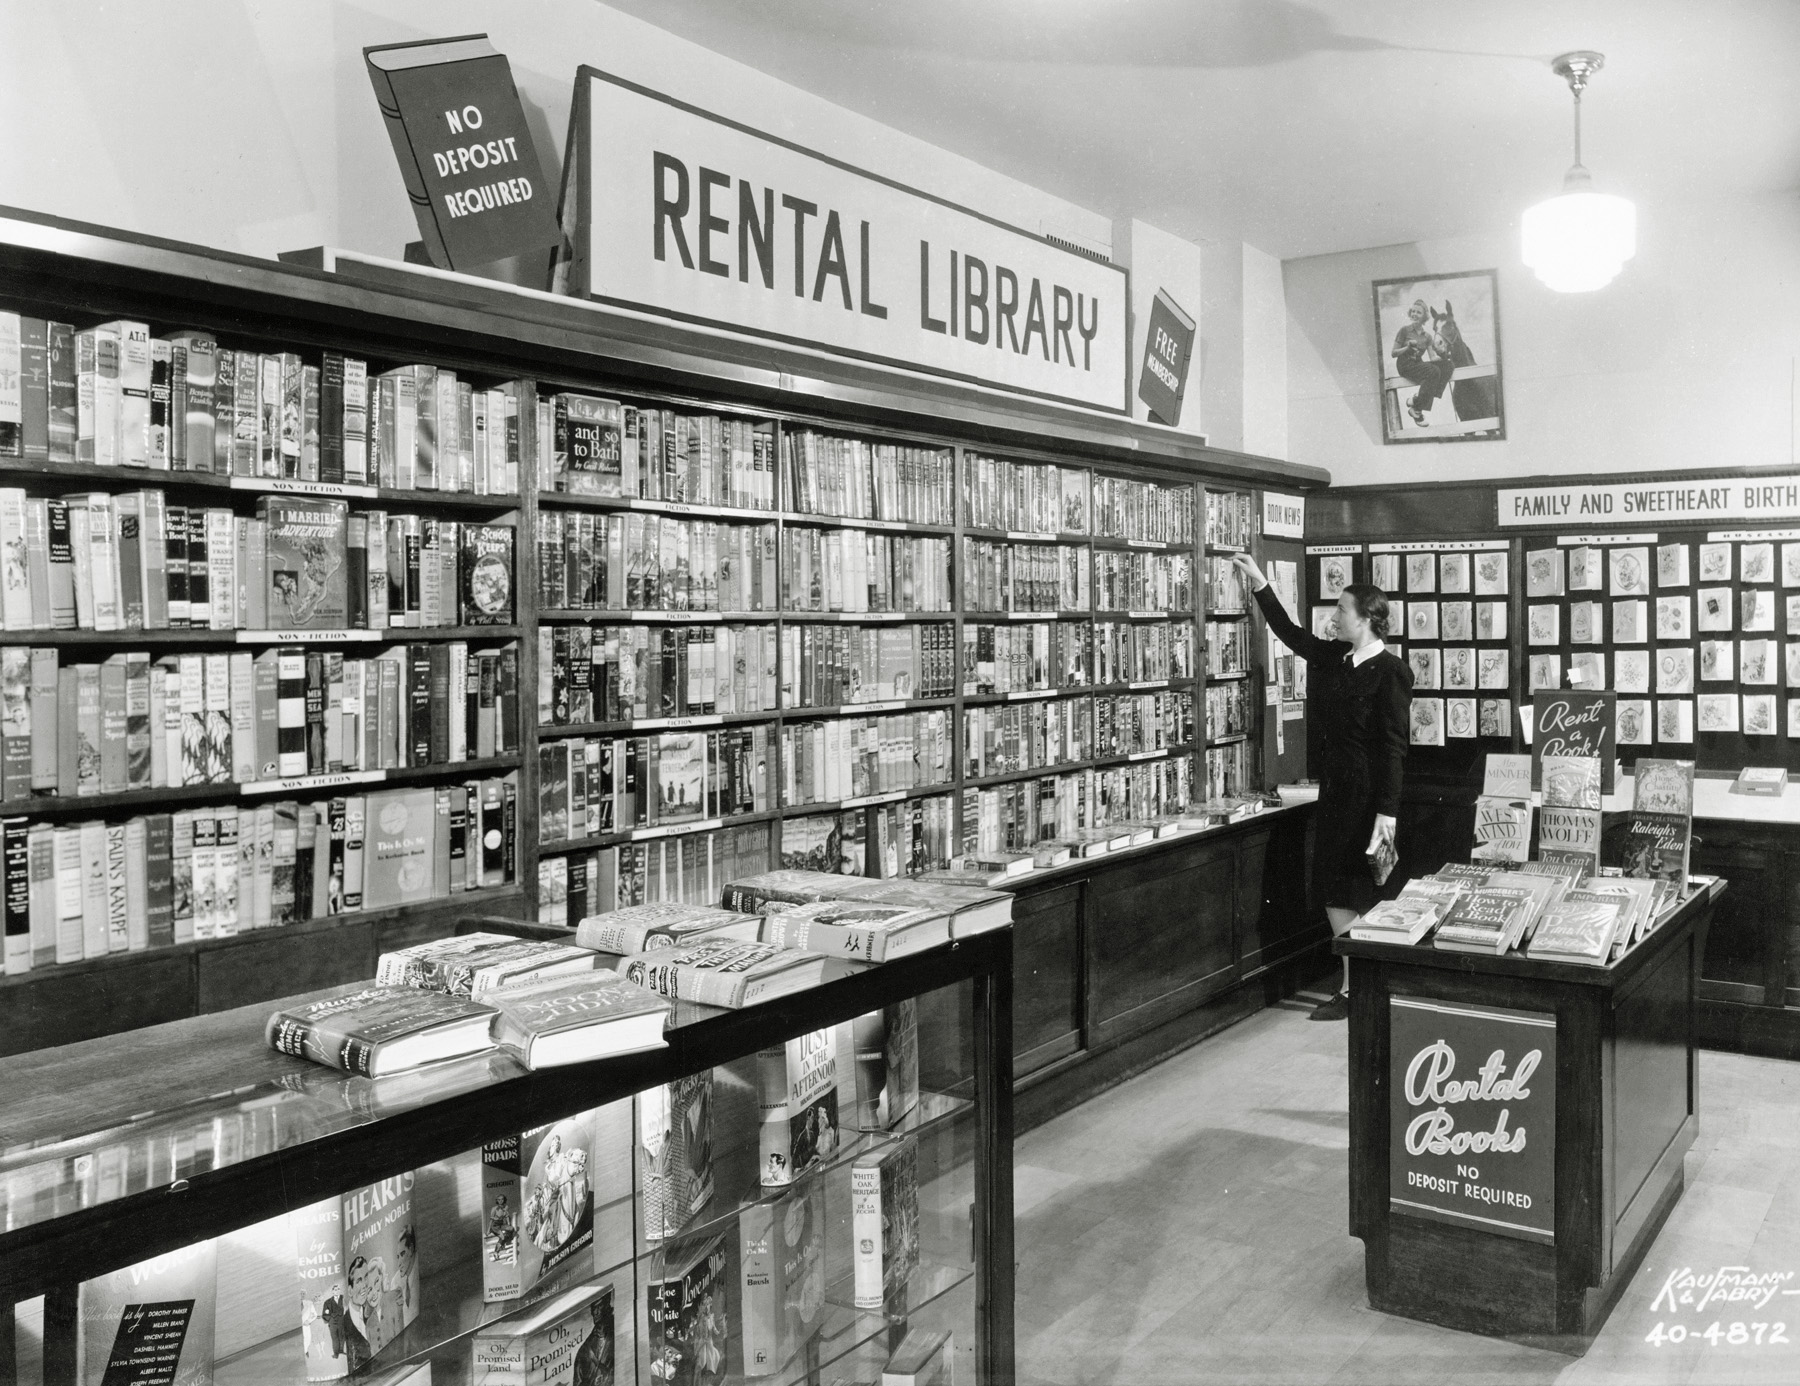 Circa 1940: In an effort to generate more foot traffic in his Chicago camera store, my grandfather Edwin Shutan dedicated a section to a book rental library and hired a staff librarian, Miss Michaels (shown). Edwin charged just 10 cents for three days with no deposit or membership required.  His library was immaculate and well-stocked with all the latest titles from authors such as Thornton Wilder, Alexander Woollcott and Lloyd C. Douglas, to name a few. View full size.